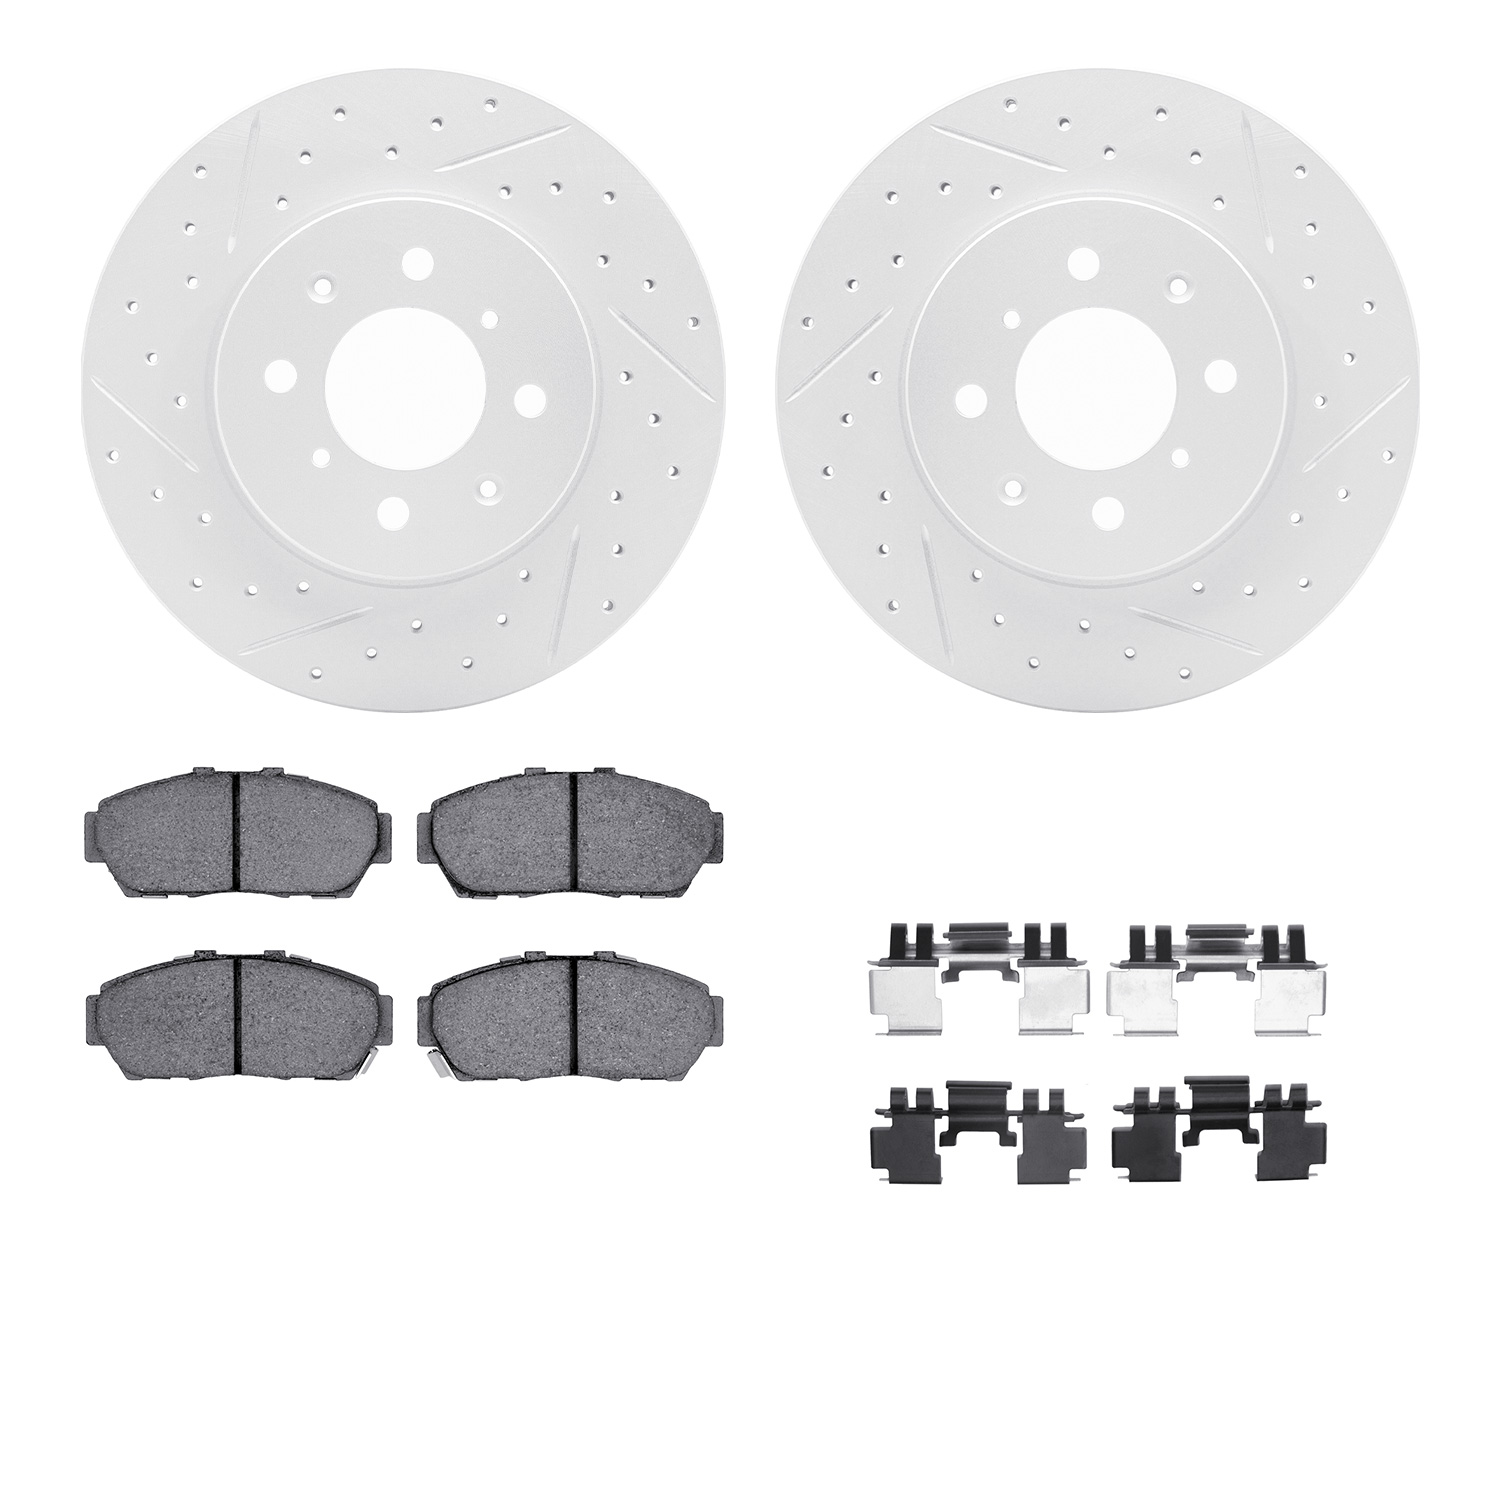 2512-59008 Geoperformance Drilled/Slotted Rotors w/5000 Advanced Brake Pads Kit & Hardware, 1993-2001 Acura/Honda, Position: Fro